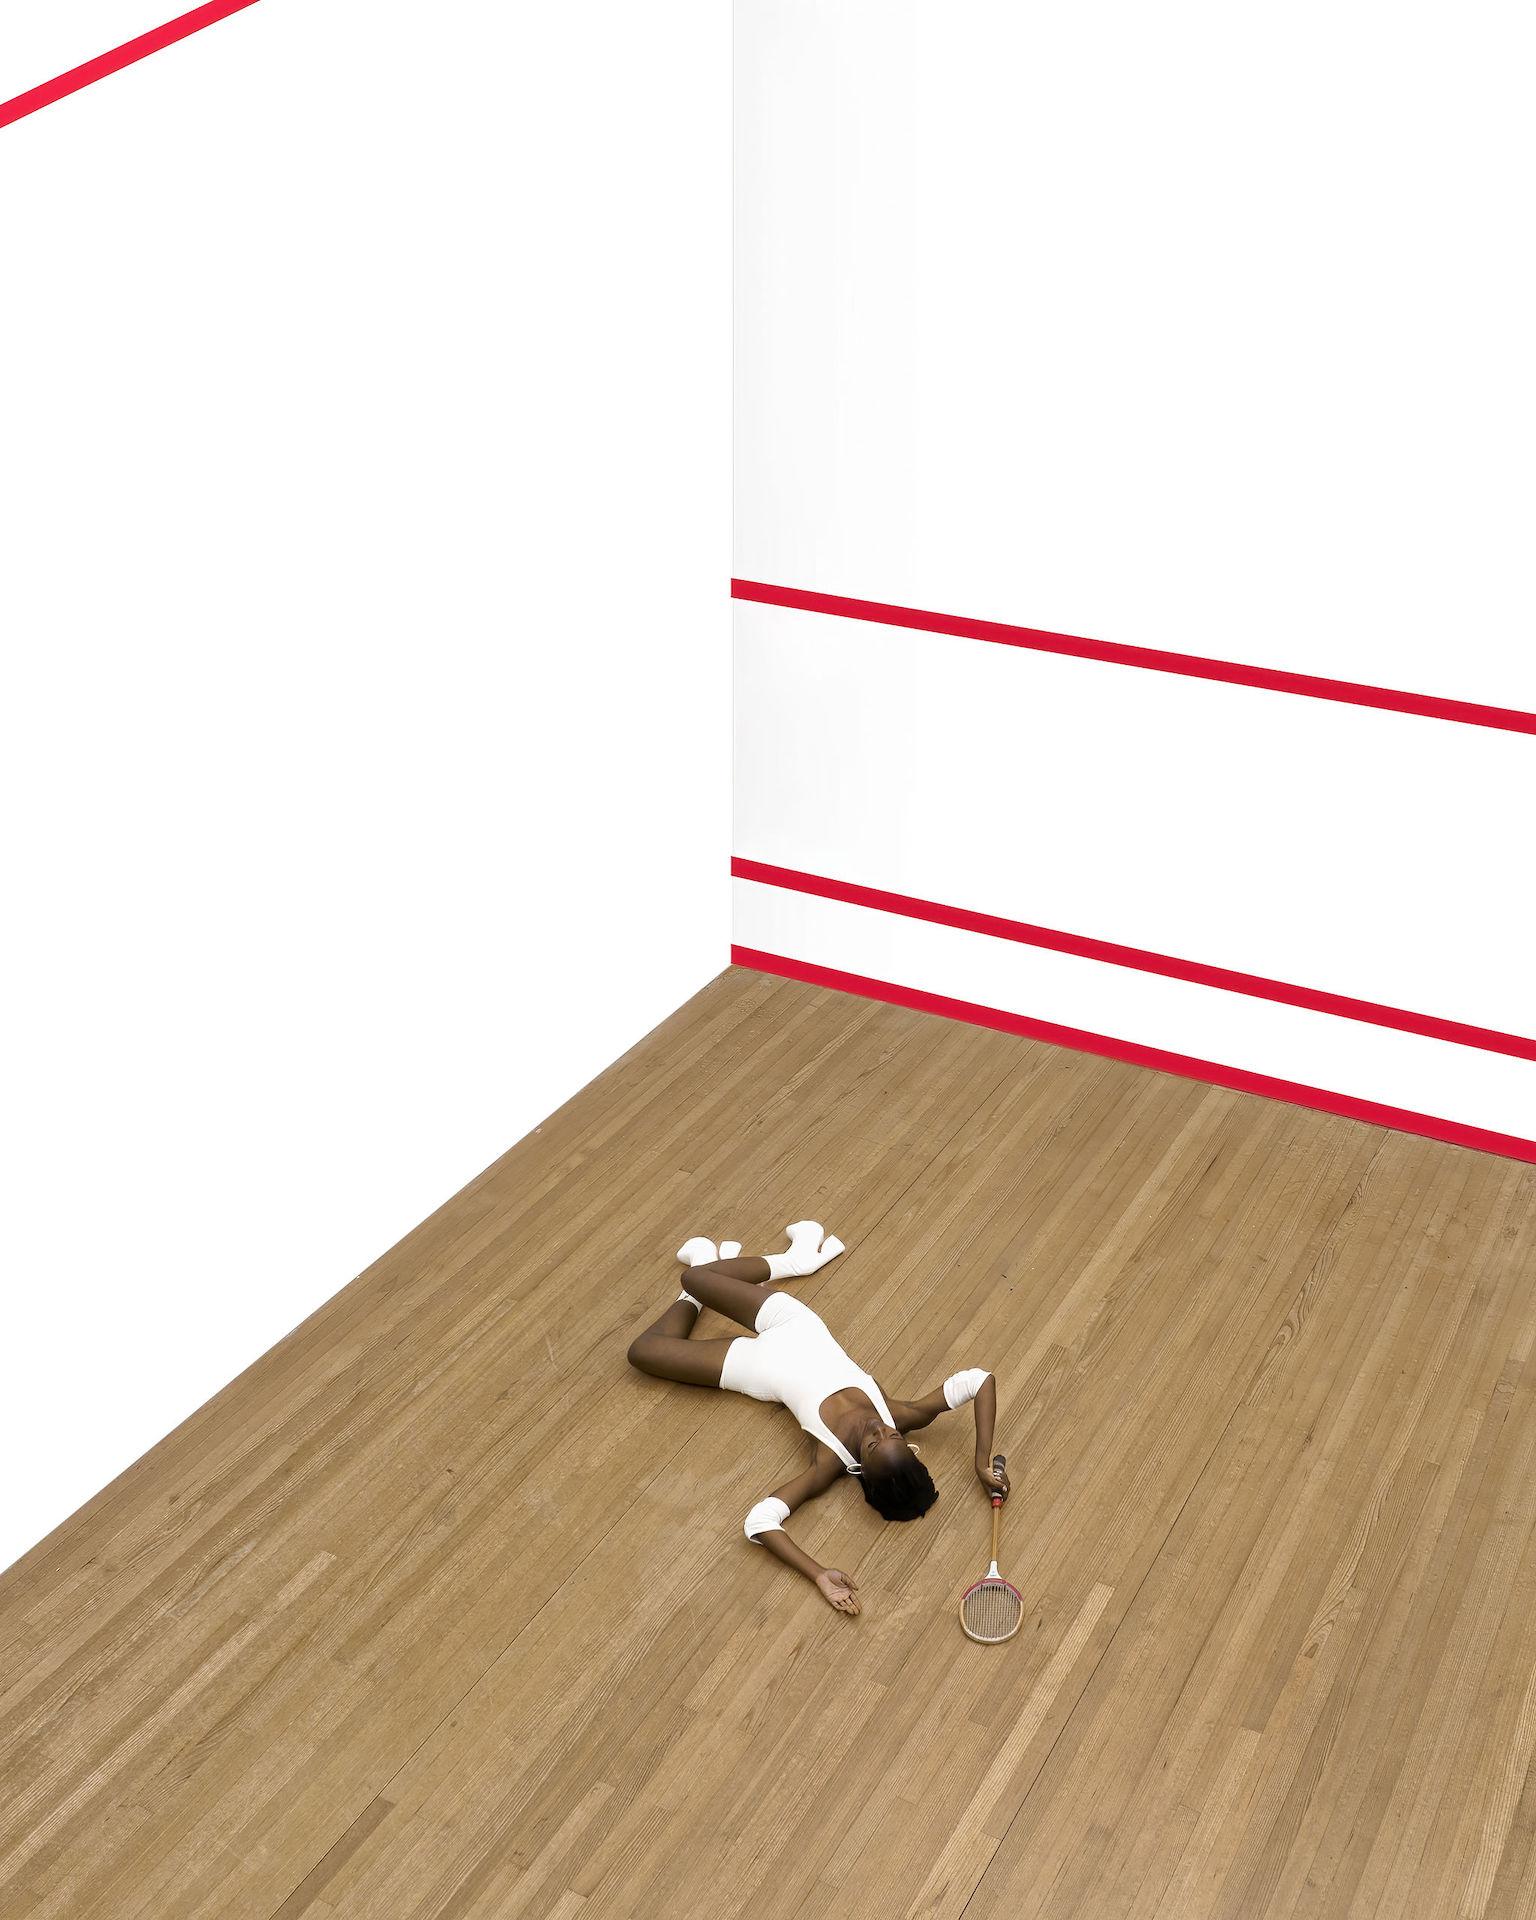 Brad Walls on His New Squash Court Drone Photography Series “Vacant”